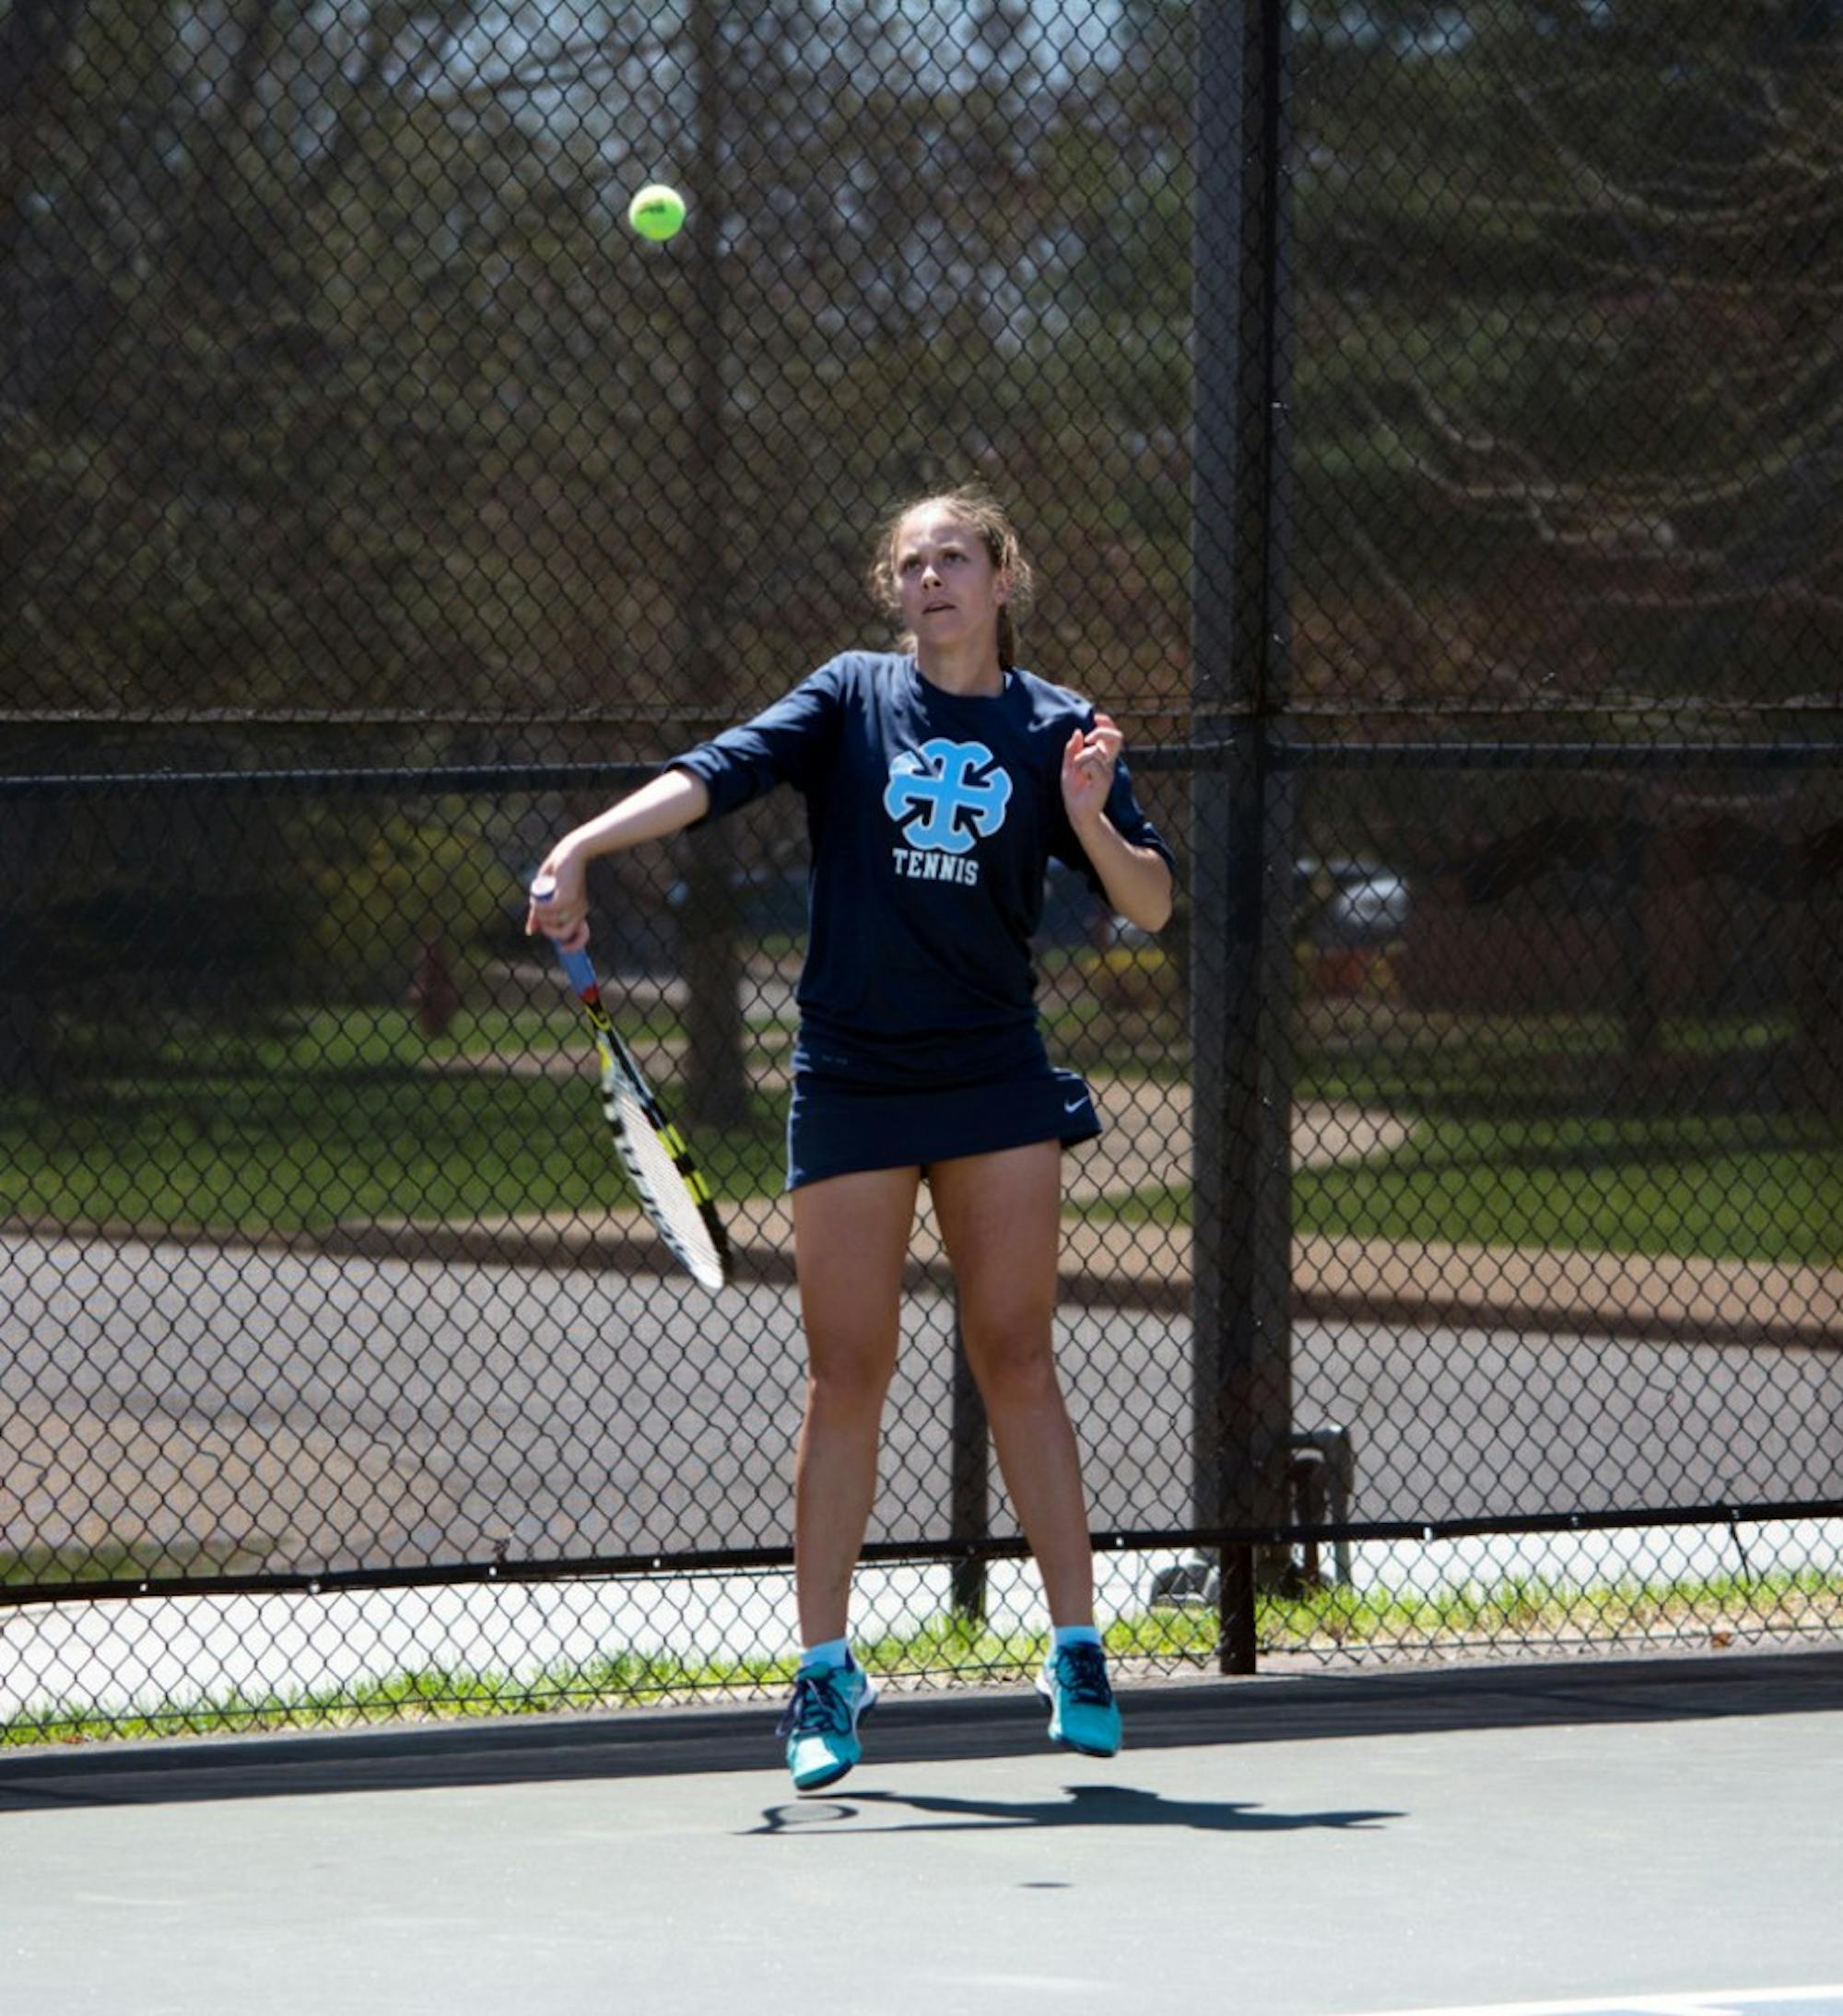 SMC senior captain Andrea Fetters hits a forehand in Saint Mary’s’ 9-0 shutout of Concordia (Mich.) on April 23 at Angela Tennis Courts.